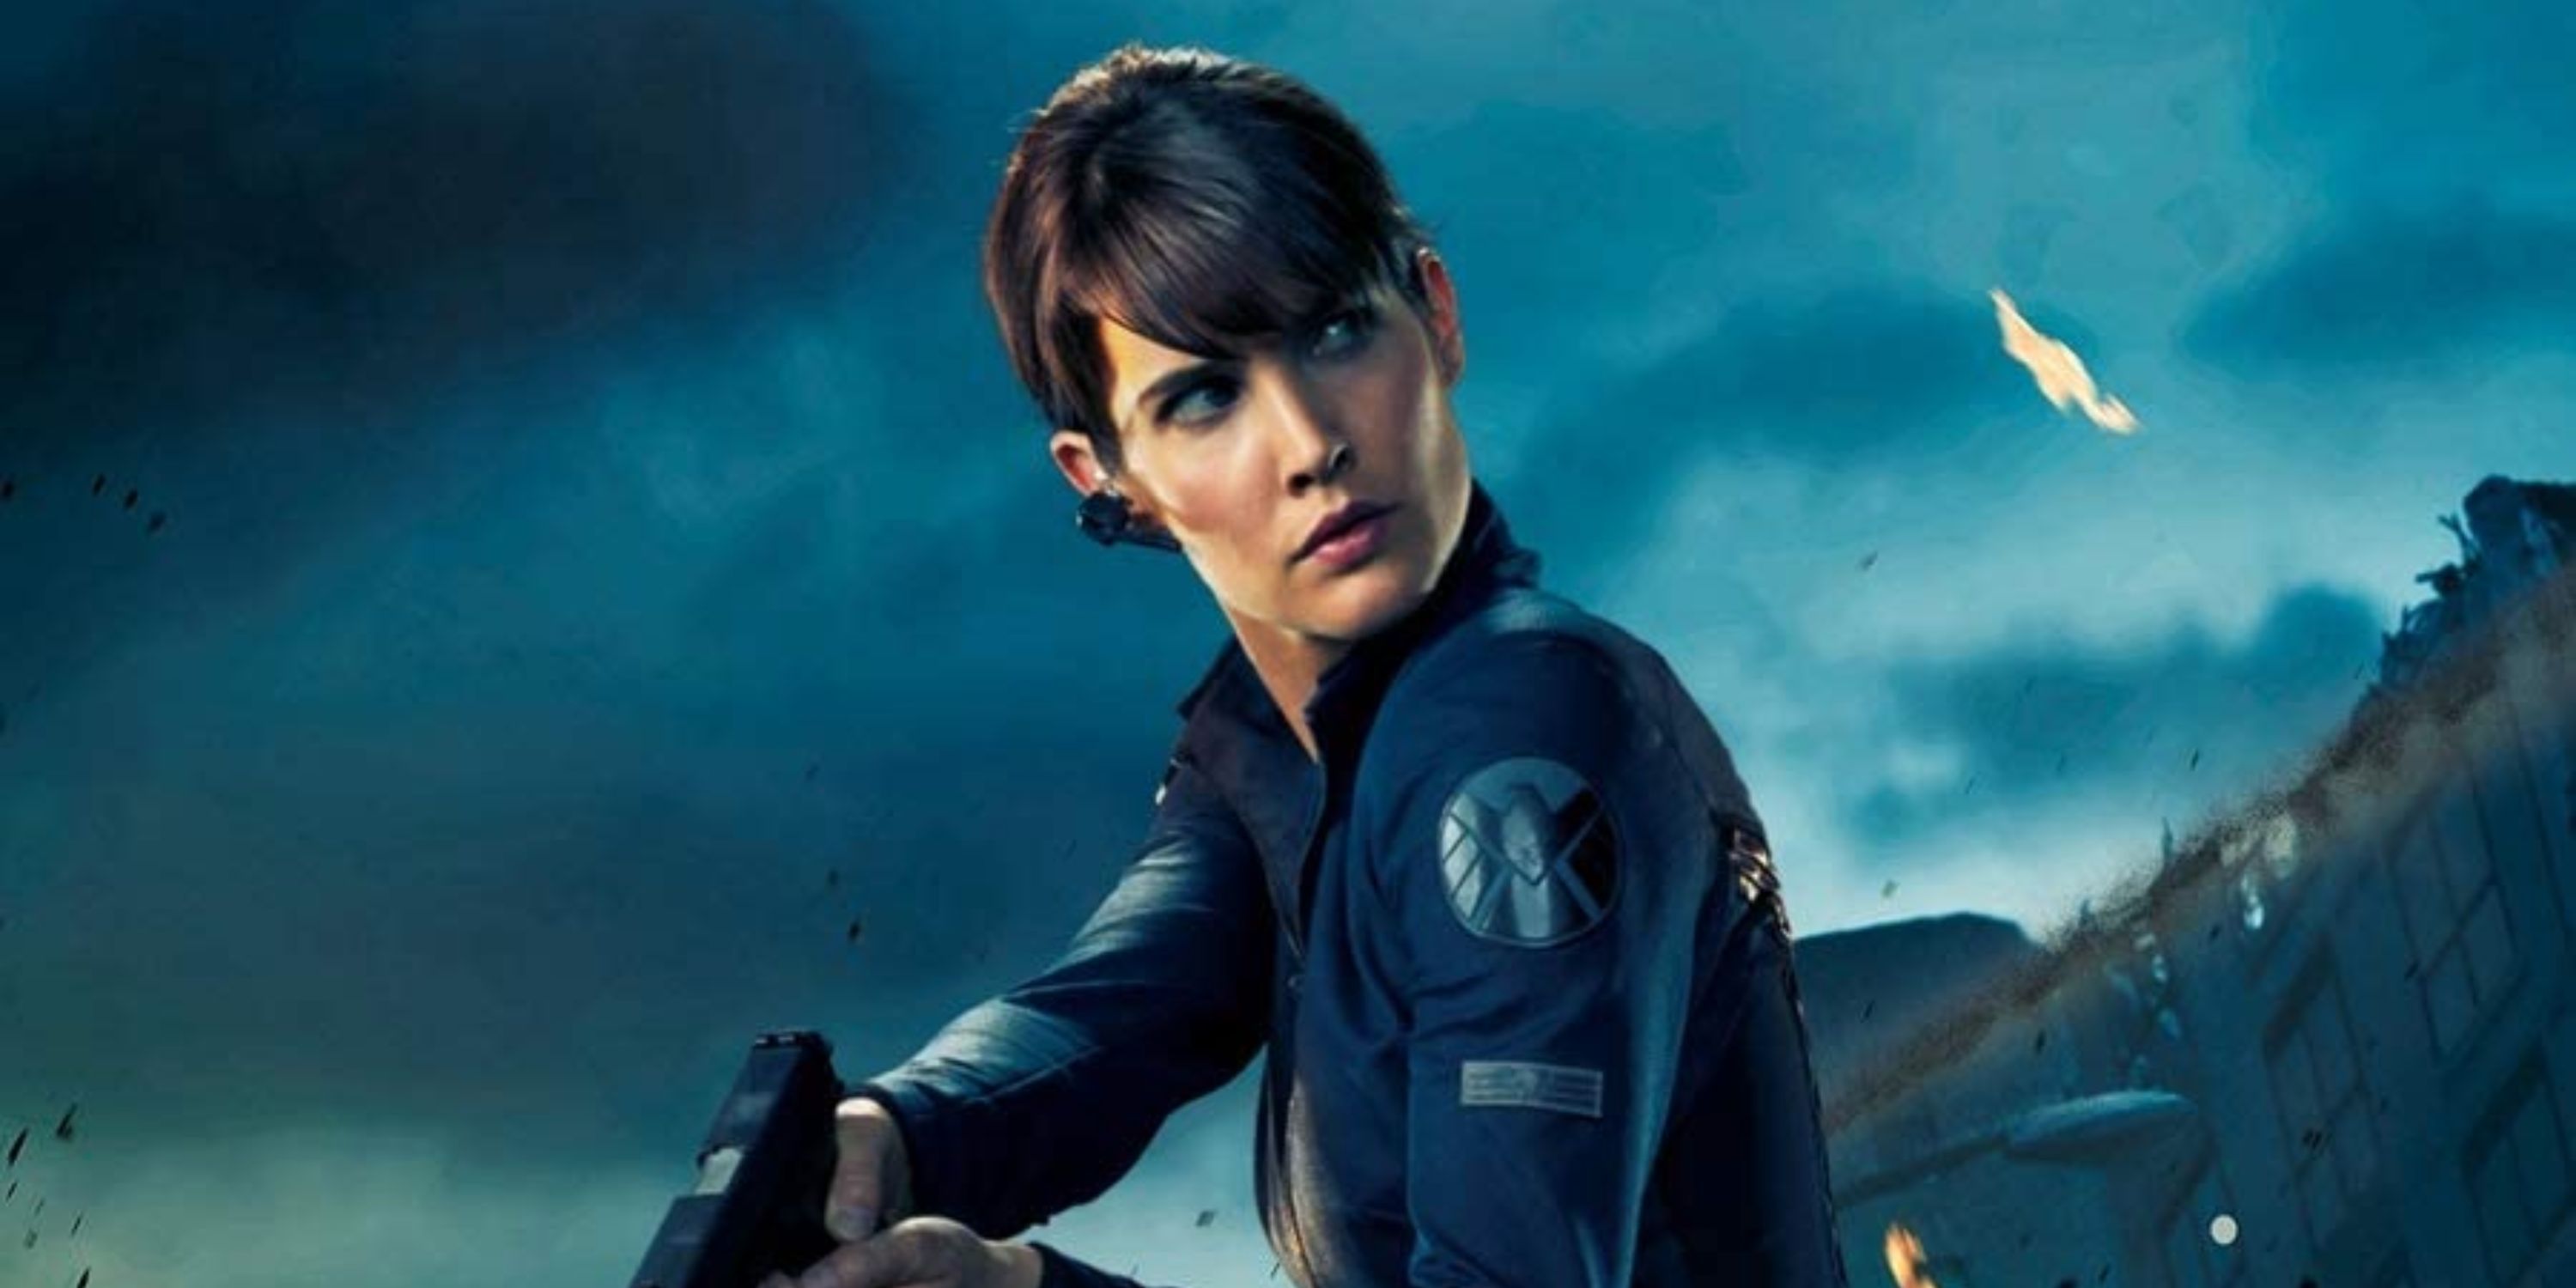 Maria Hill promo image for The Avengers